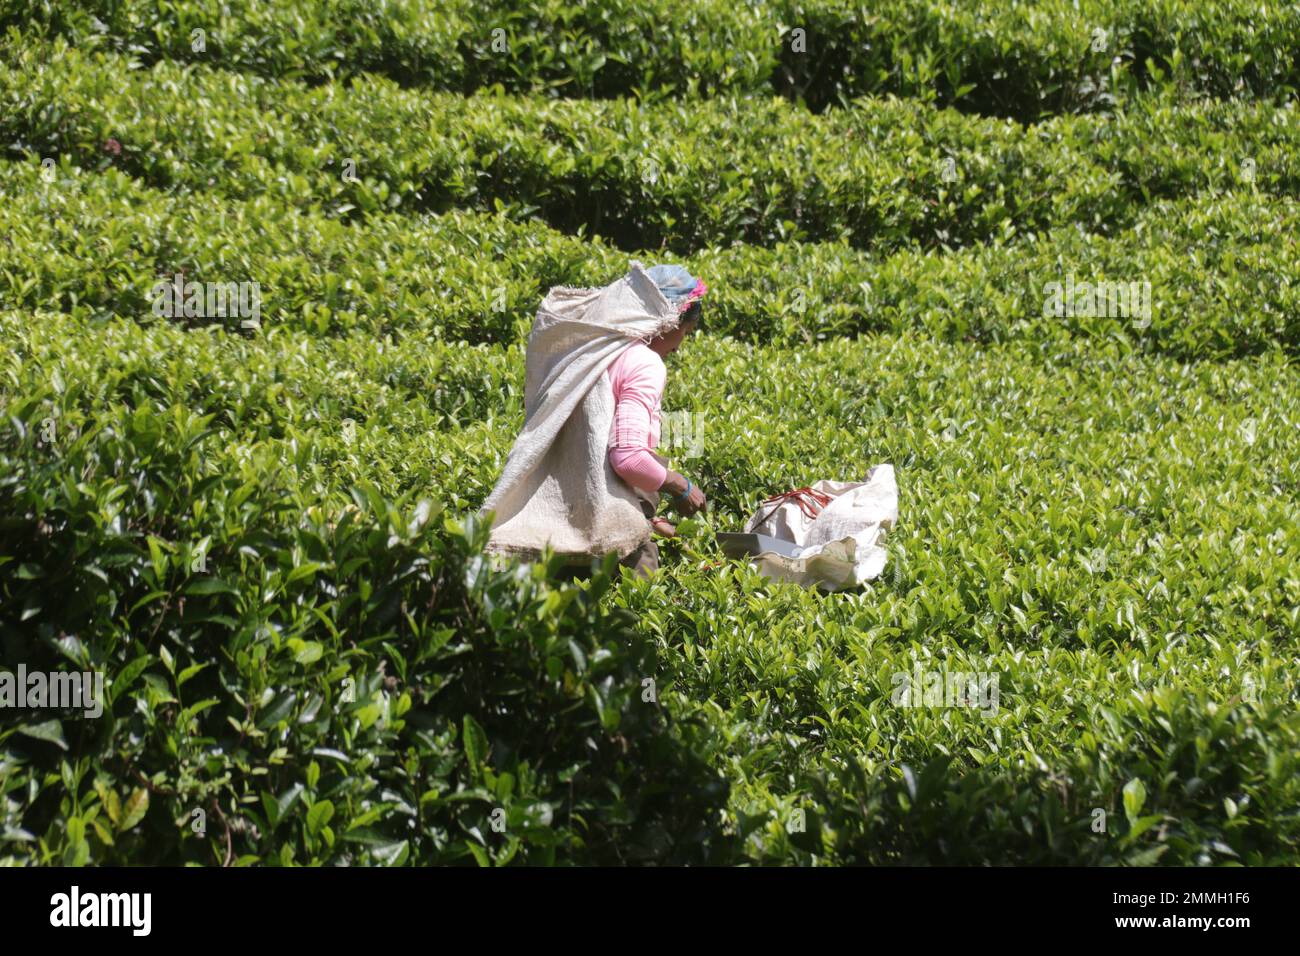 Day today life of people in Sri Lanka Stock Photo